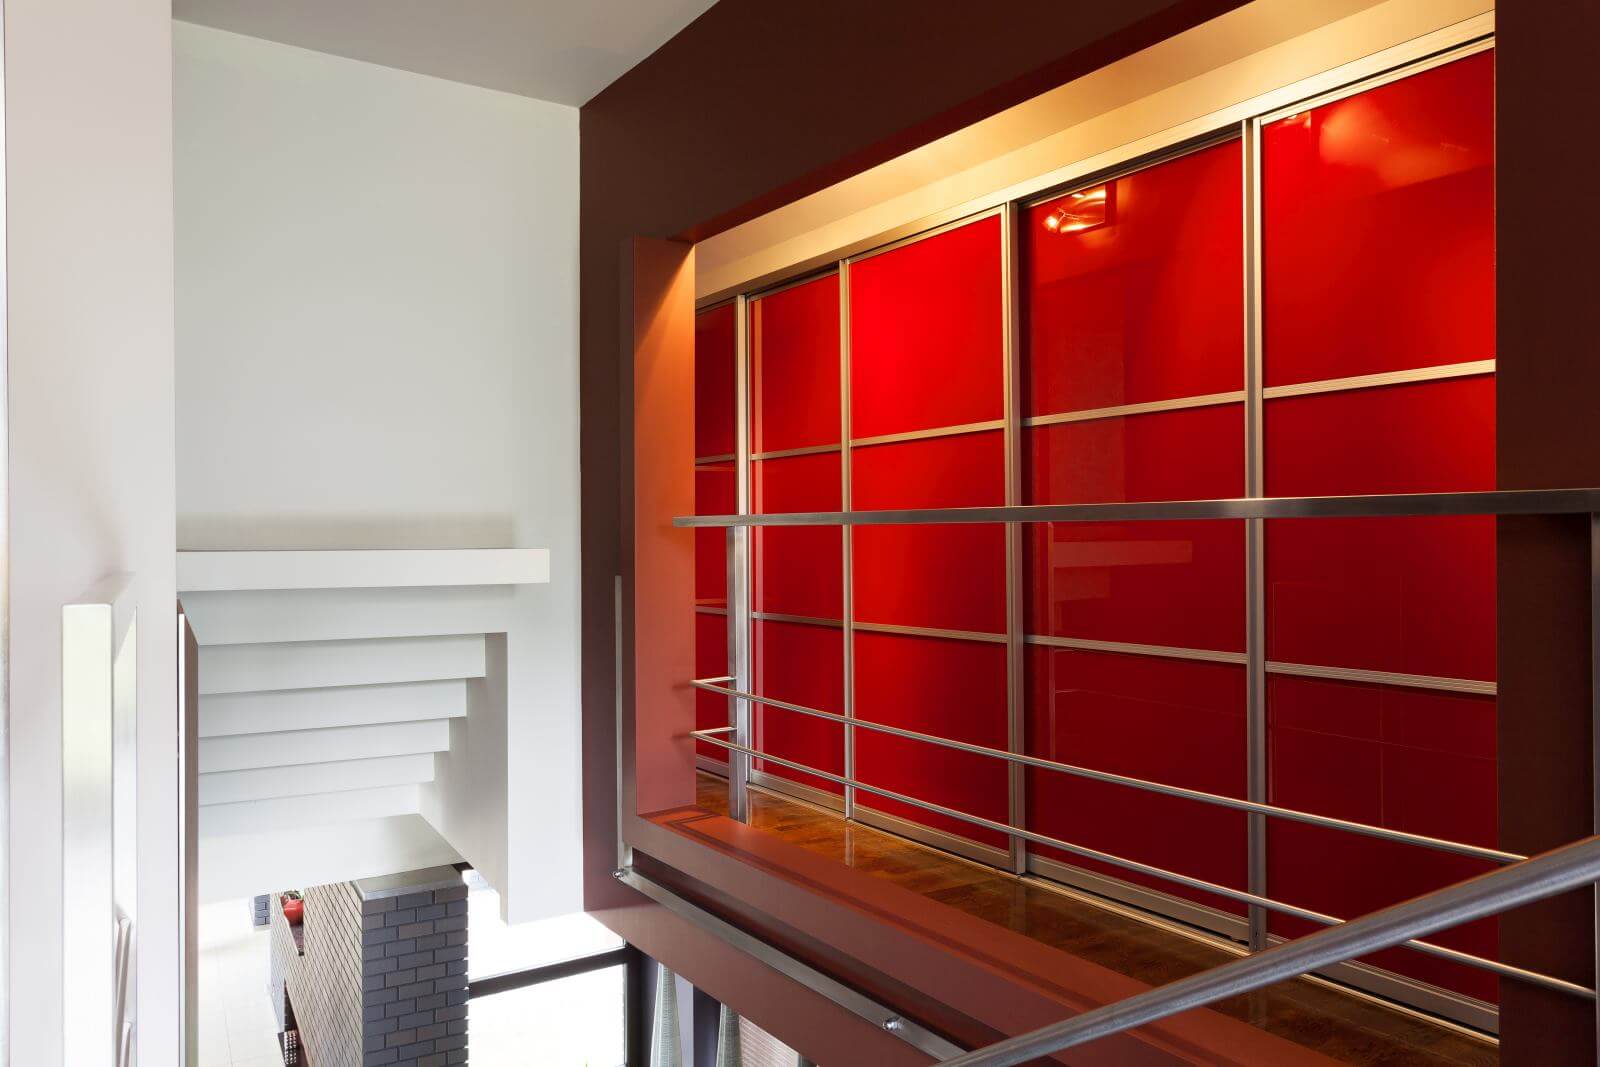 A moder red wardrobe area on the first floor